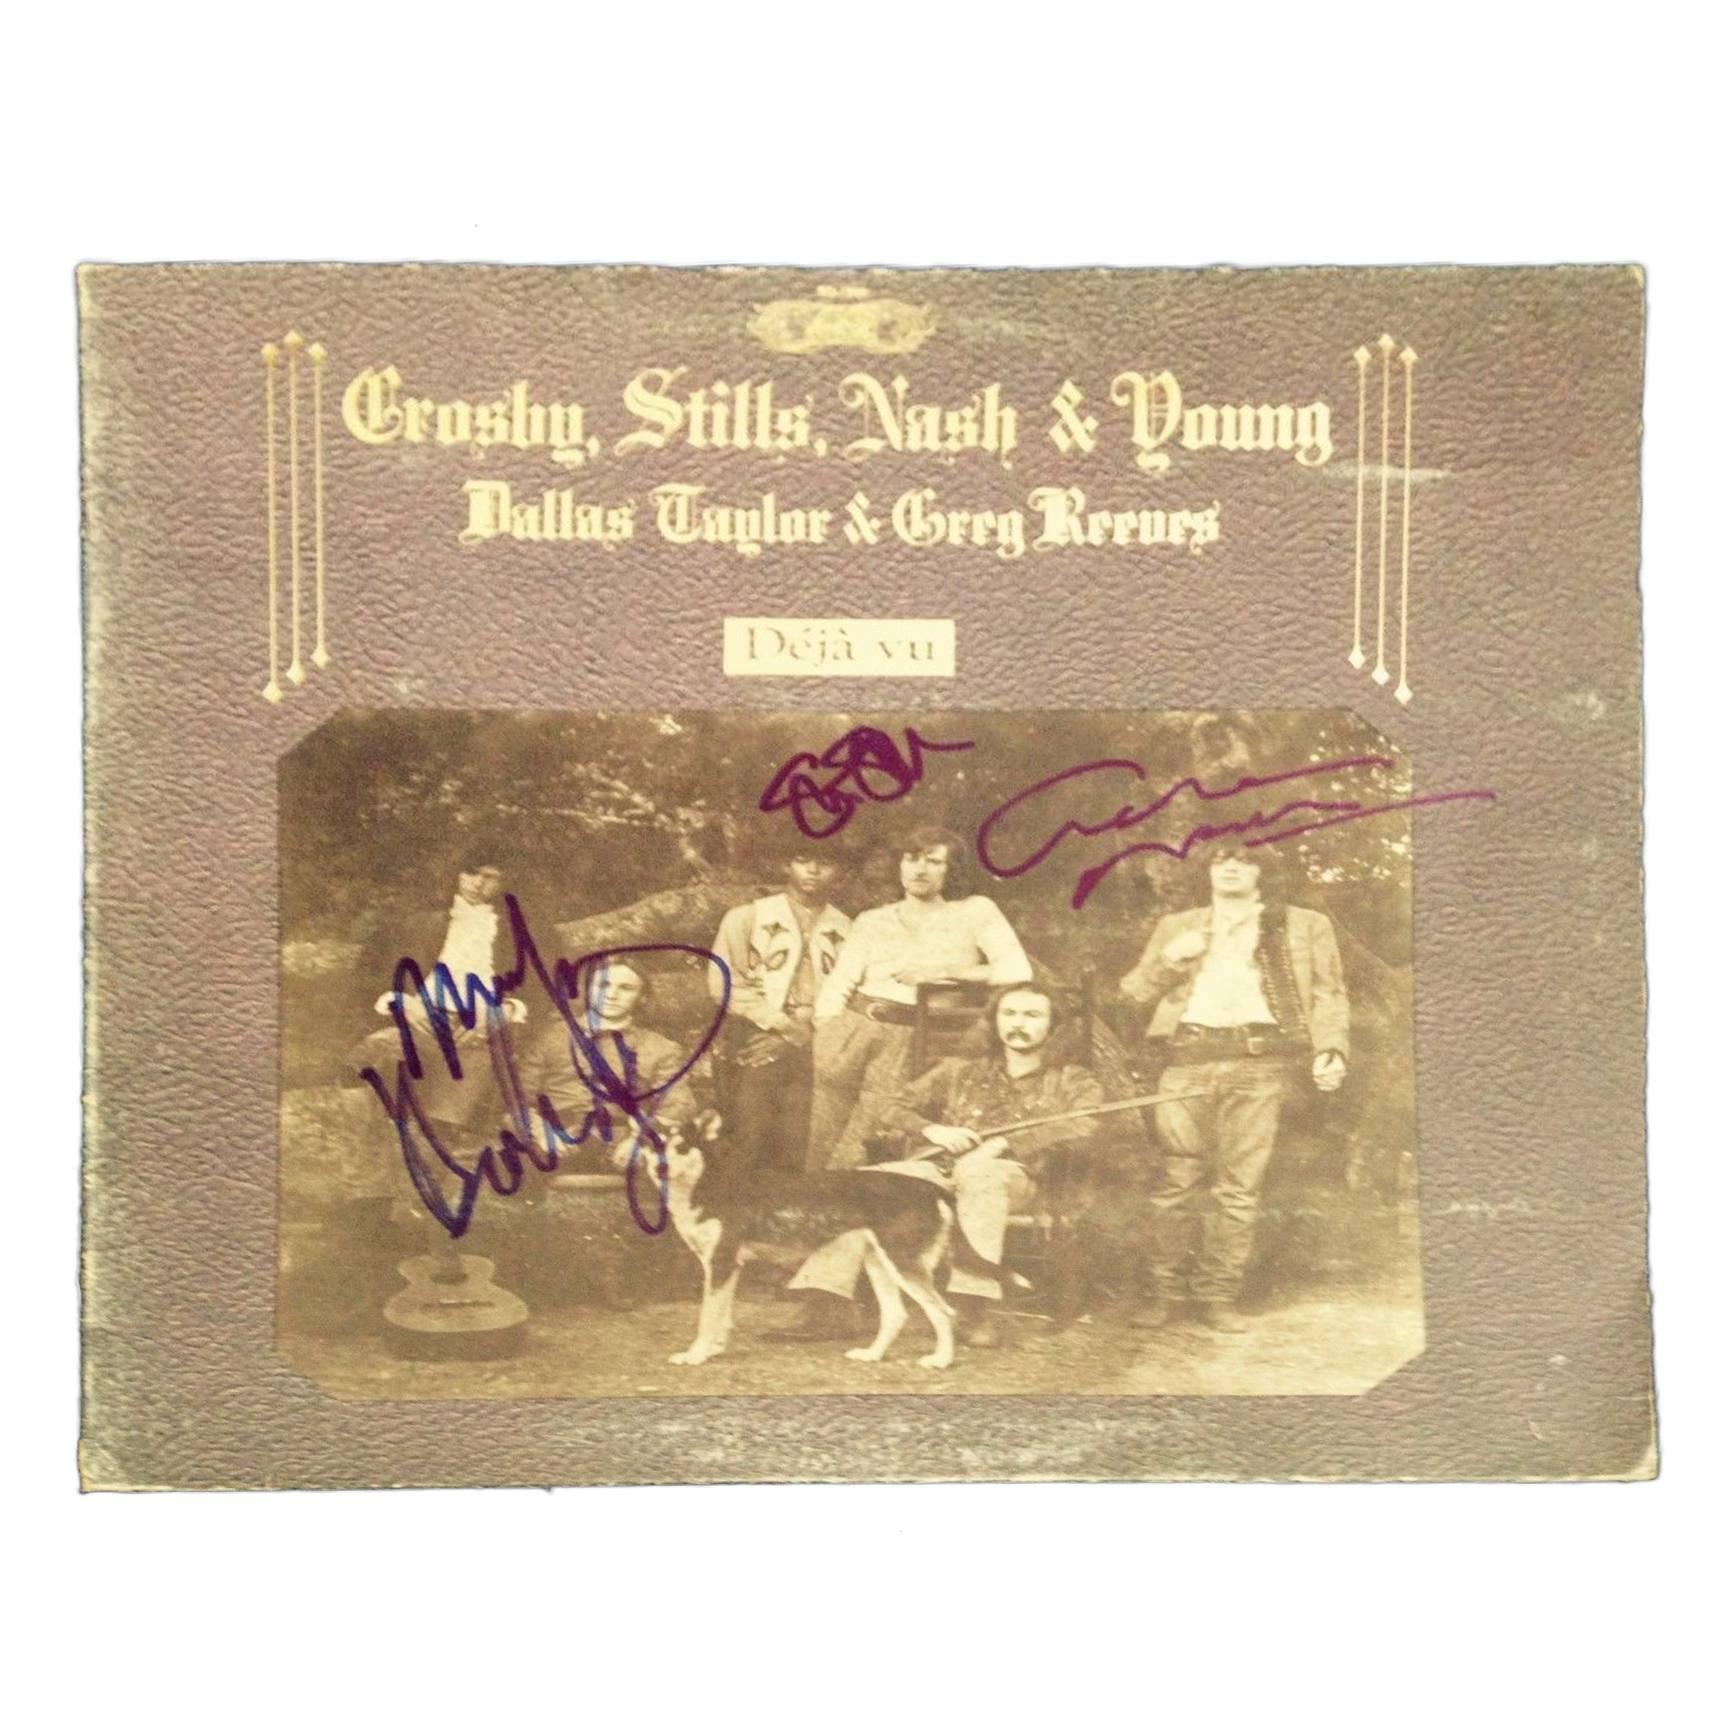 Crosby, Stills Nash and Young and Elton John Autographed Record Albums For Sale